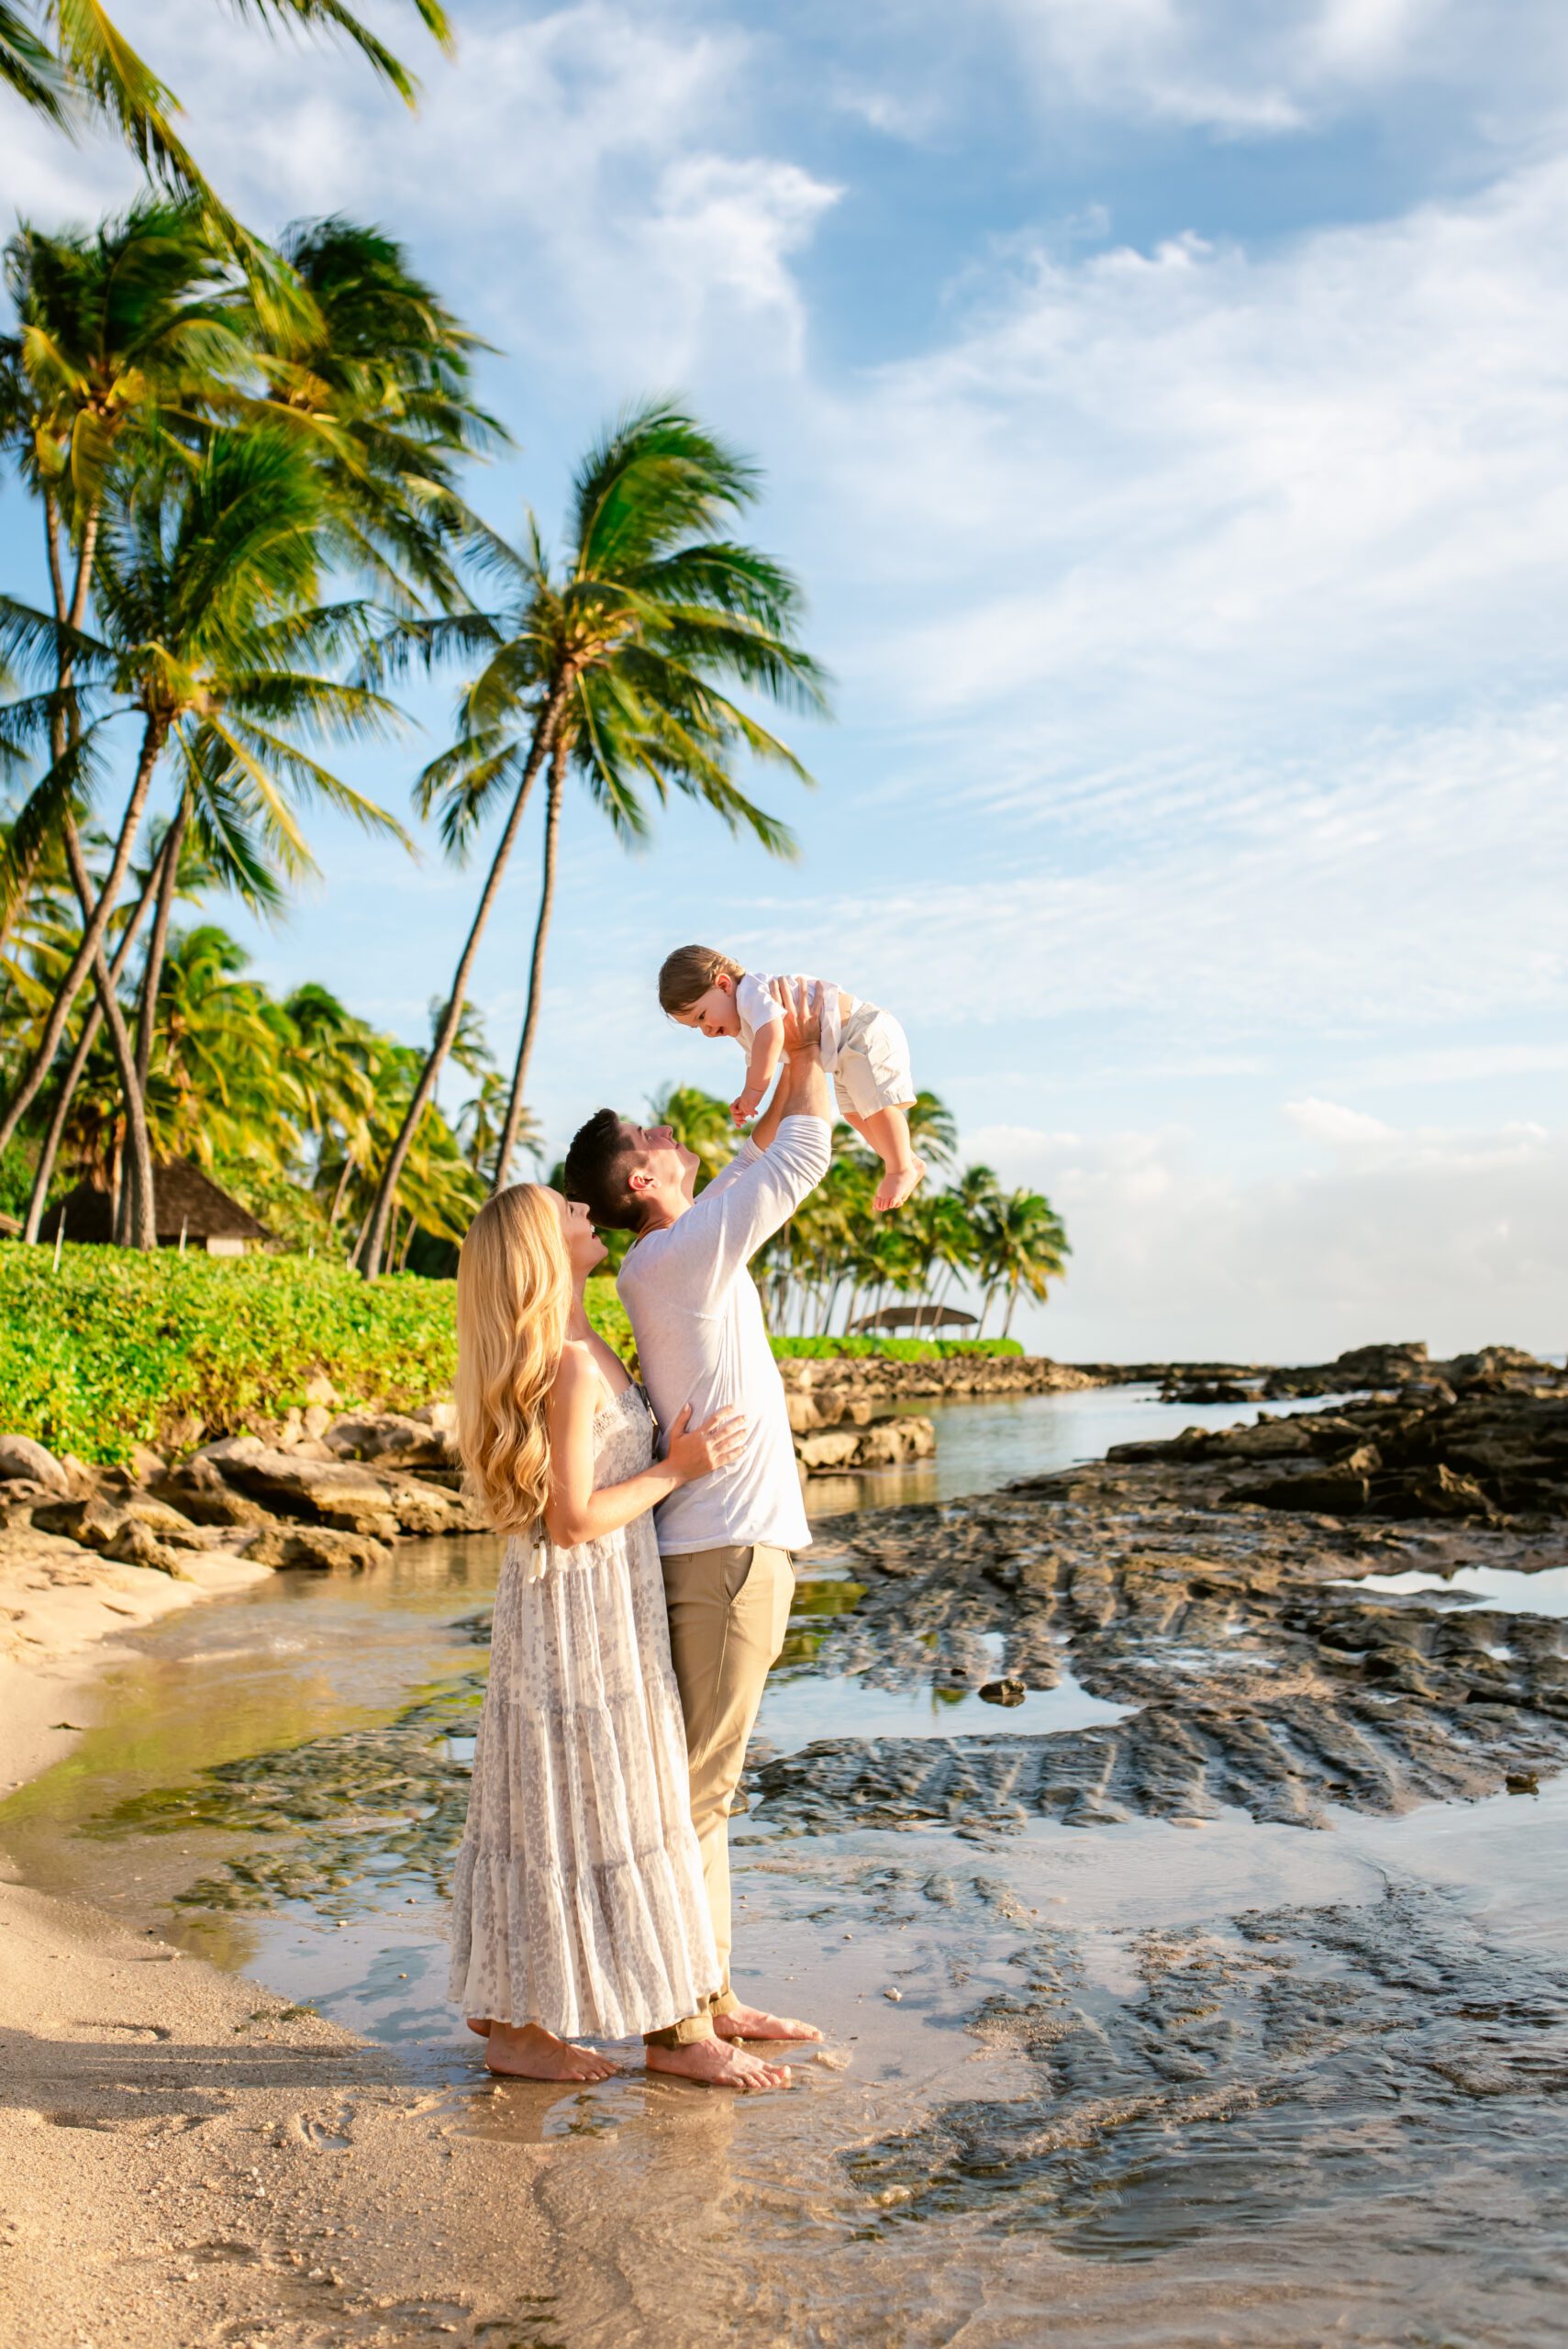 Family of three on a beach with palm trees and lava rocks